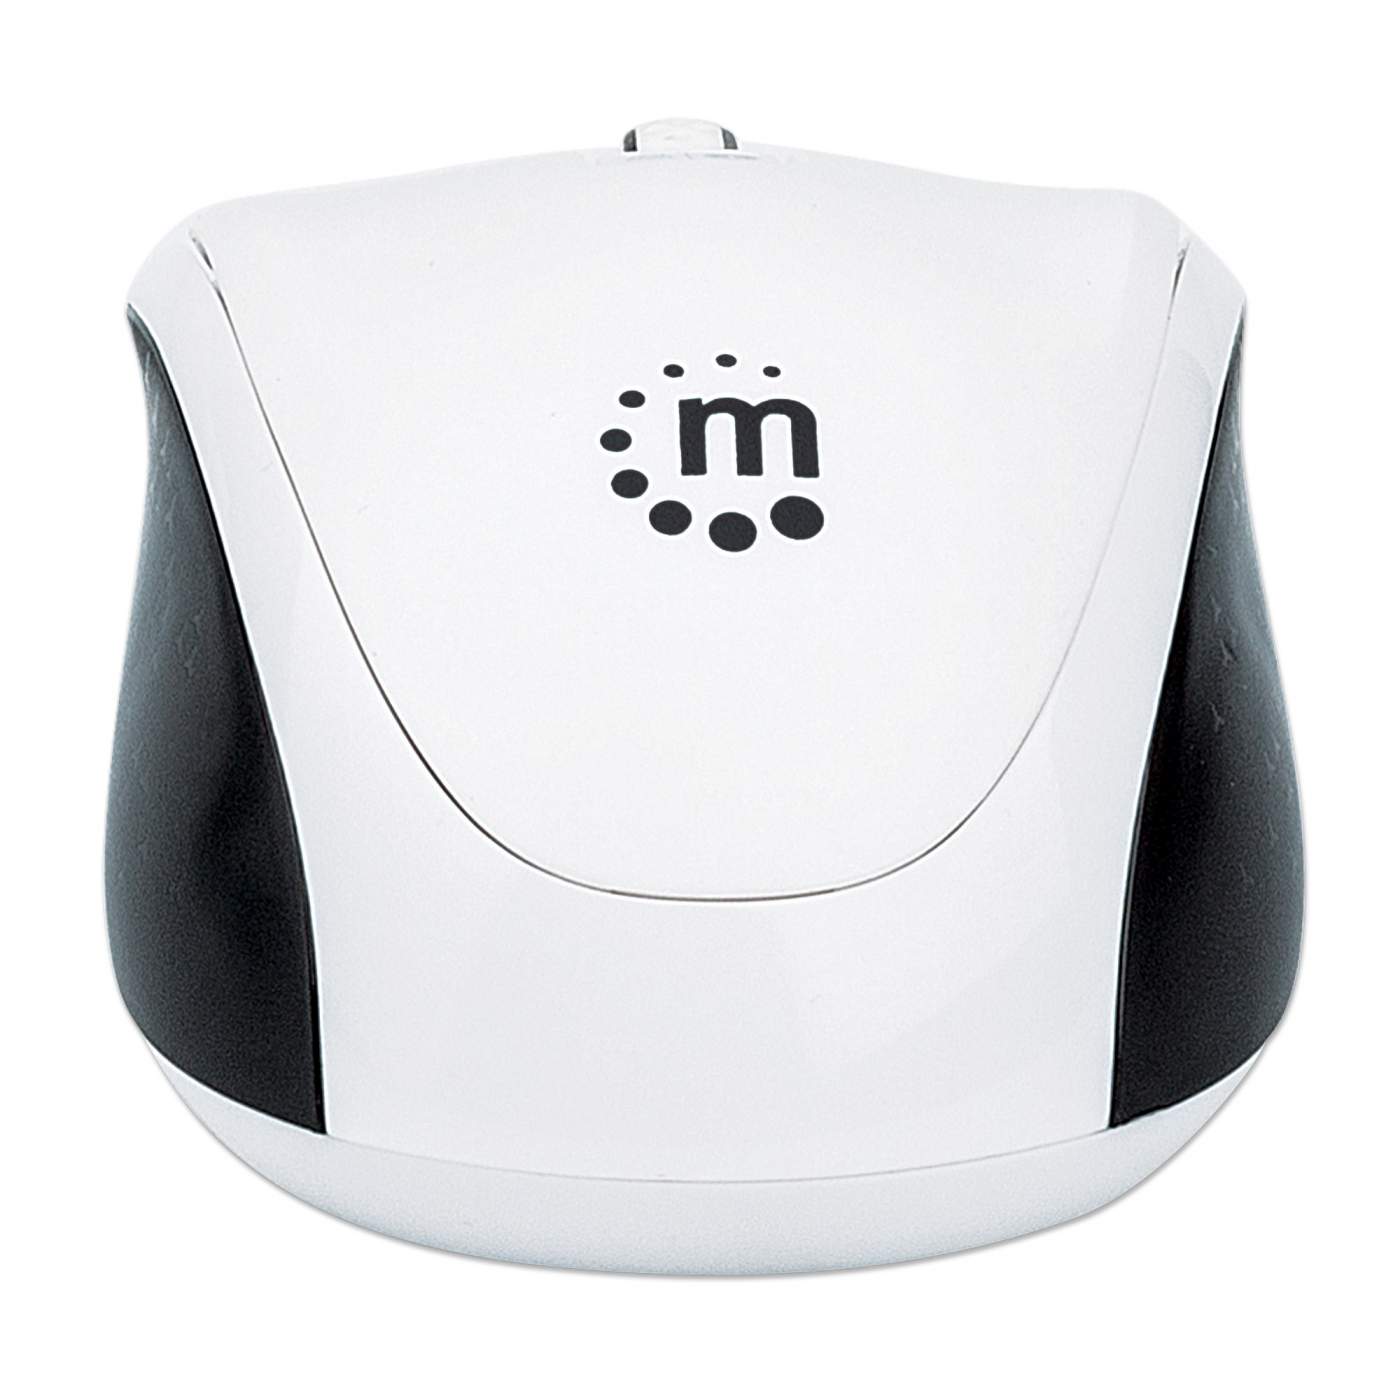 Dual-Mode Mouse Image 3